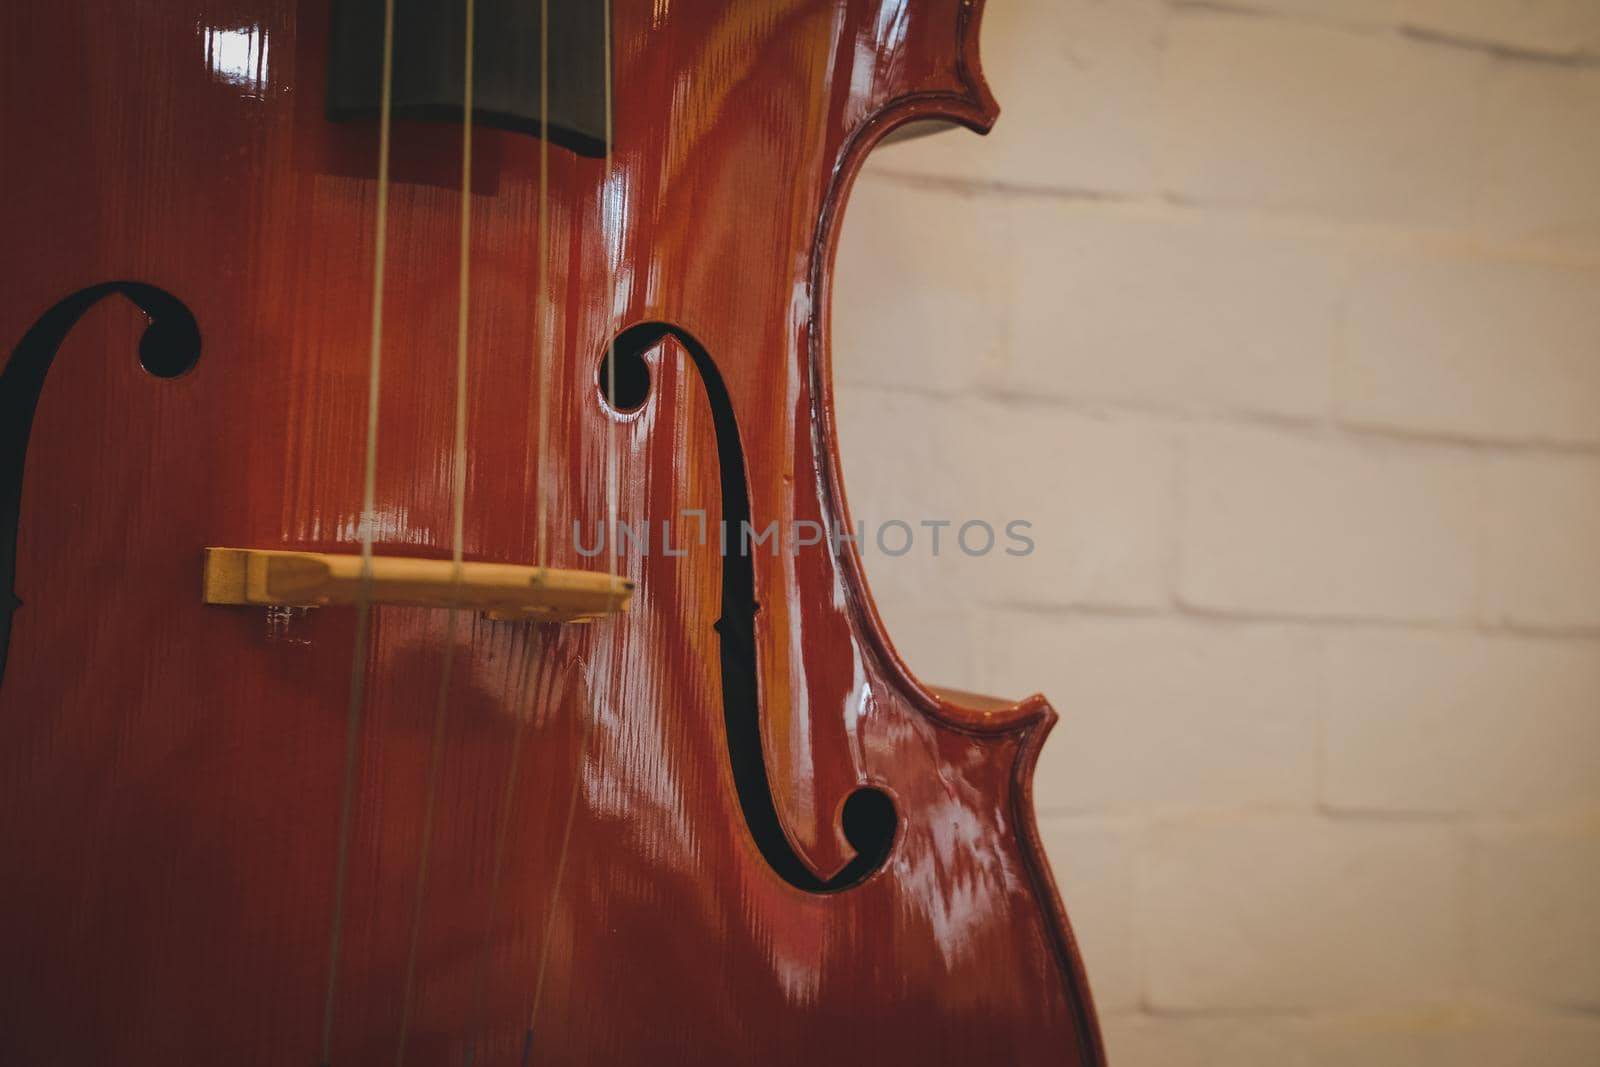 brown cello near red wall. musical instrument